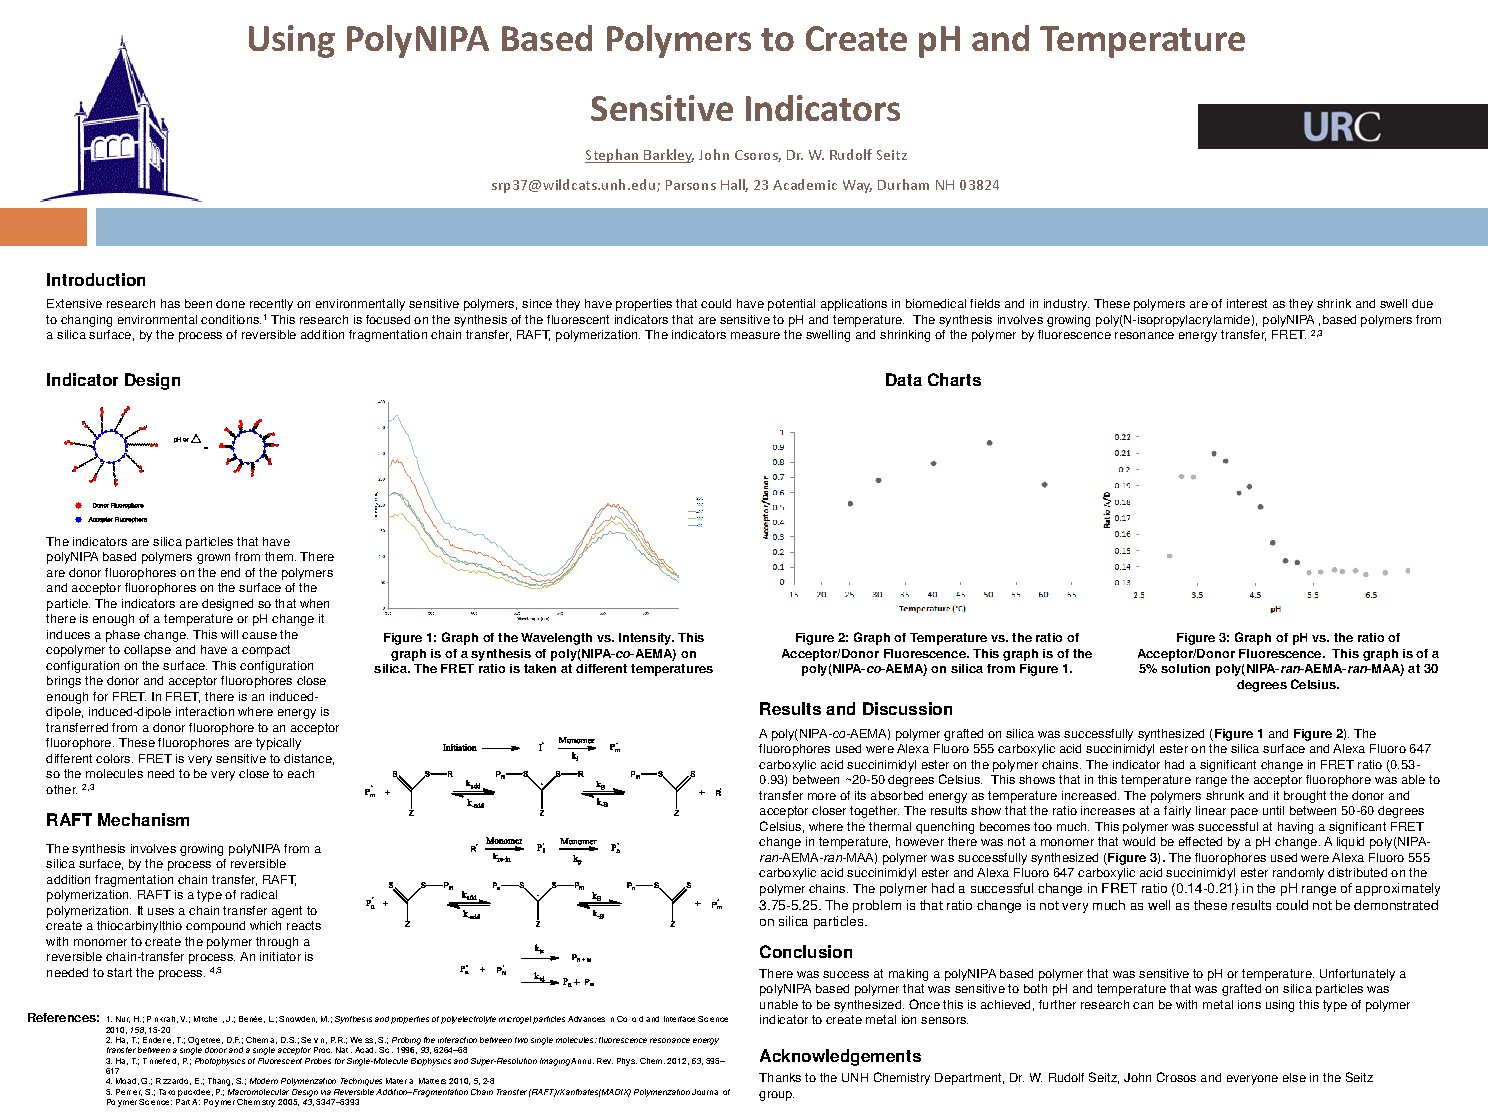 Using Polynipa Based Polymers To Create Ph And Temperature Sensitive Indicators  by srp37